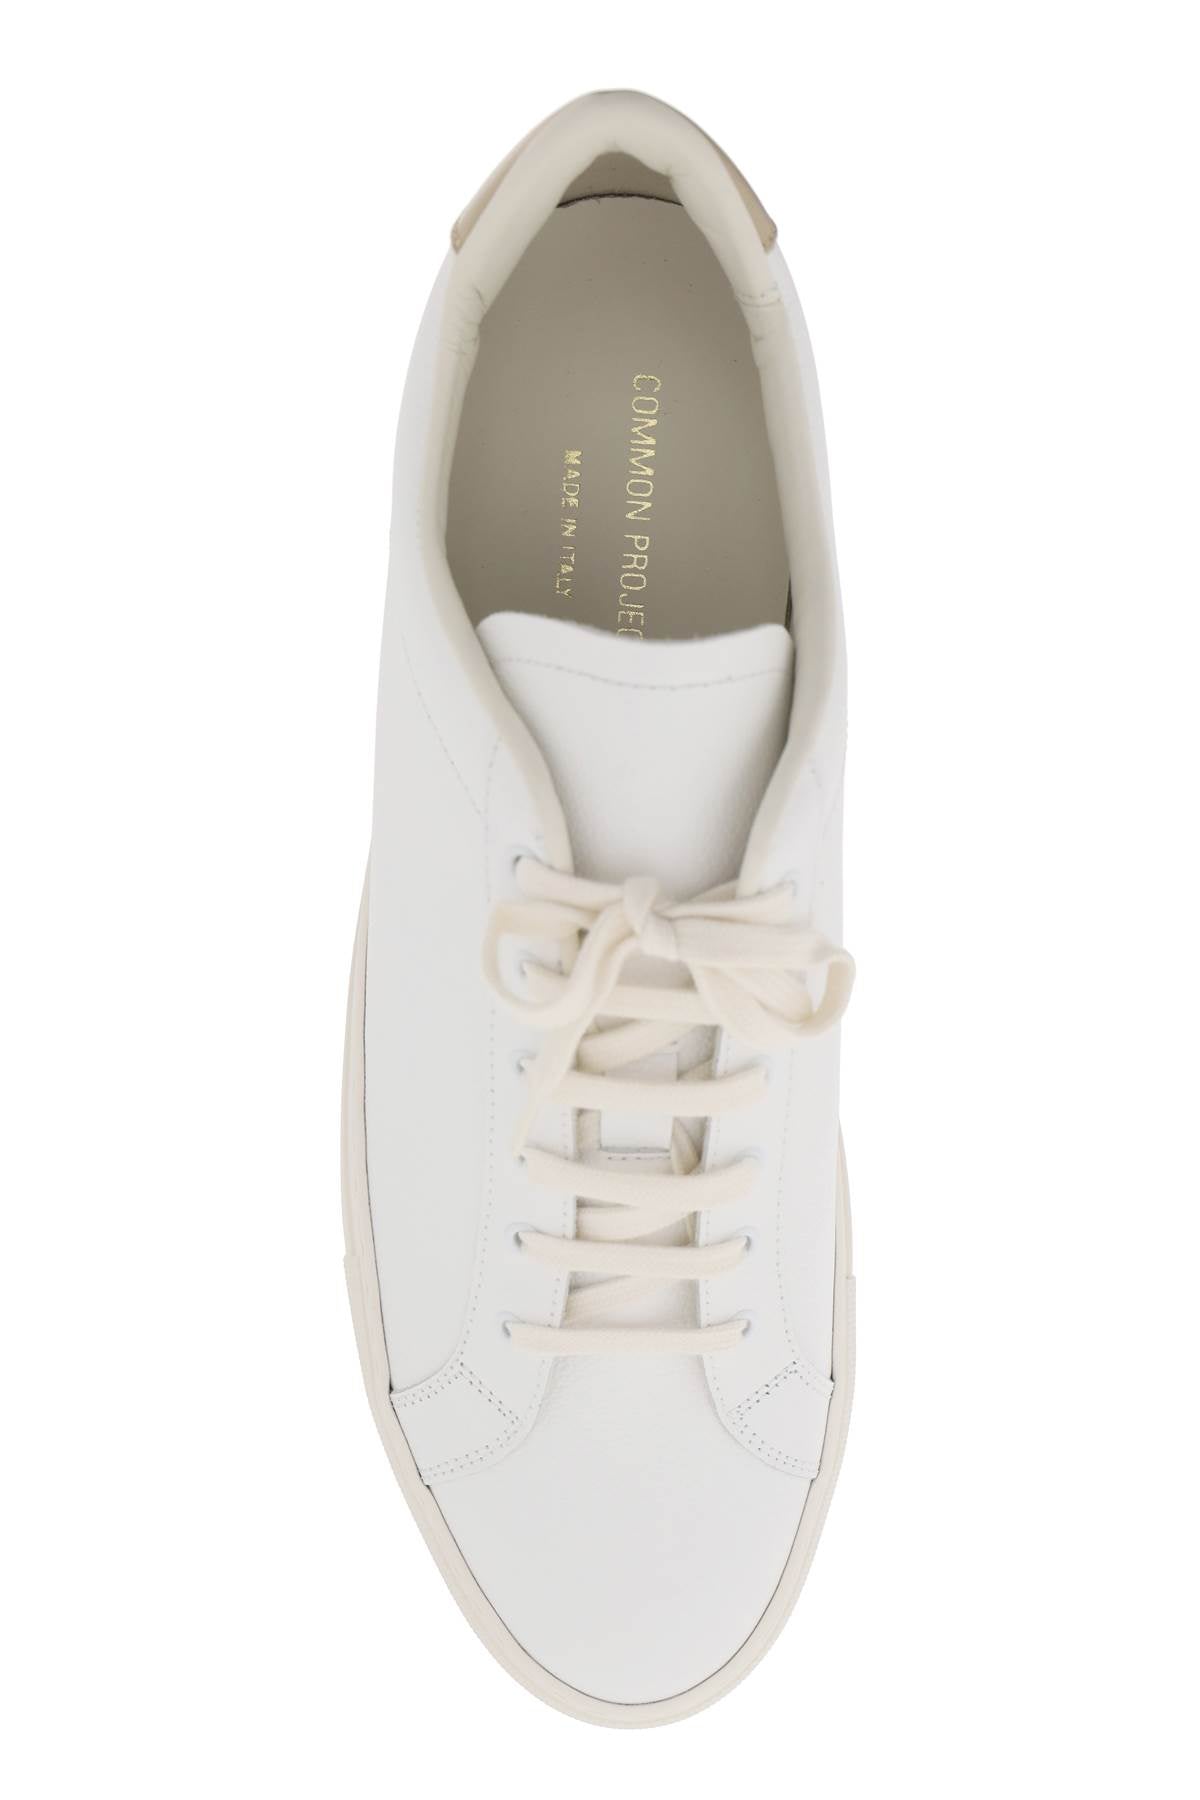 Common projects retro low top sne-1